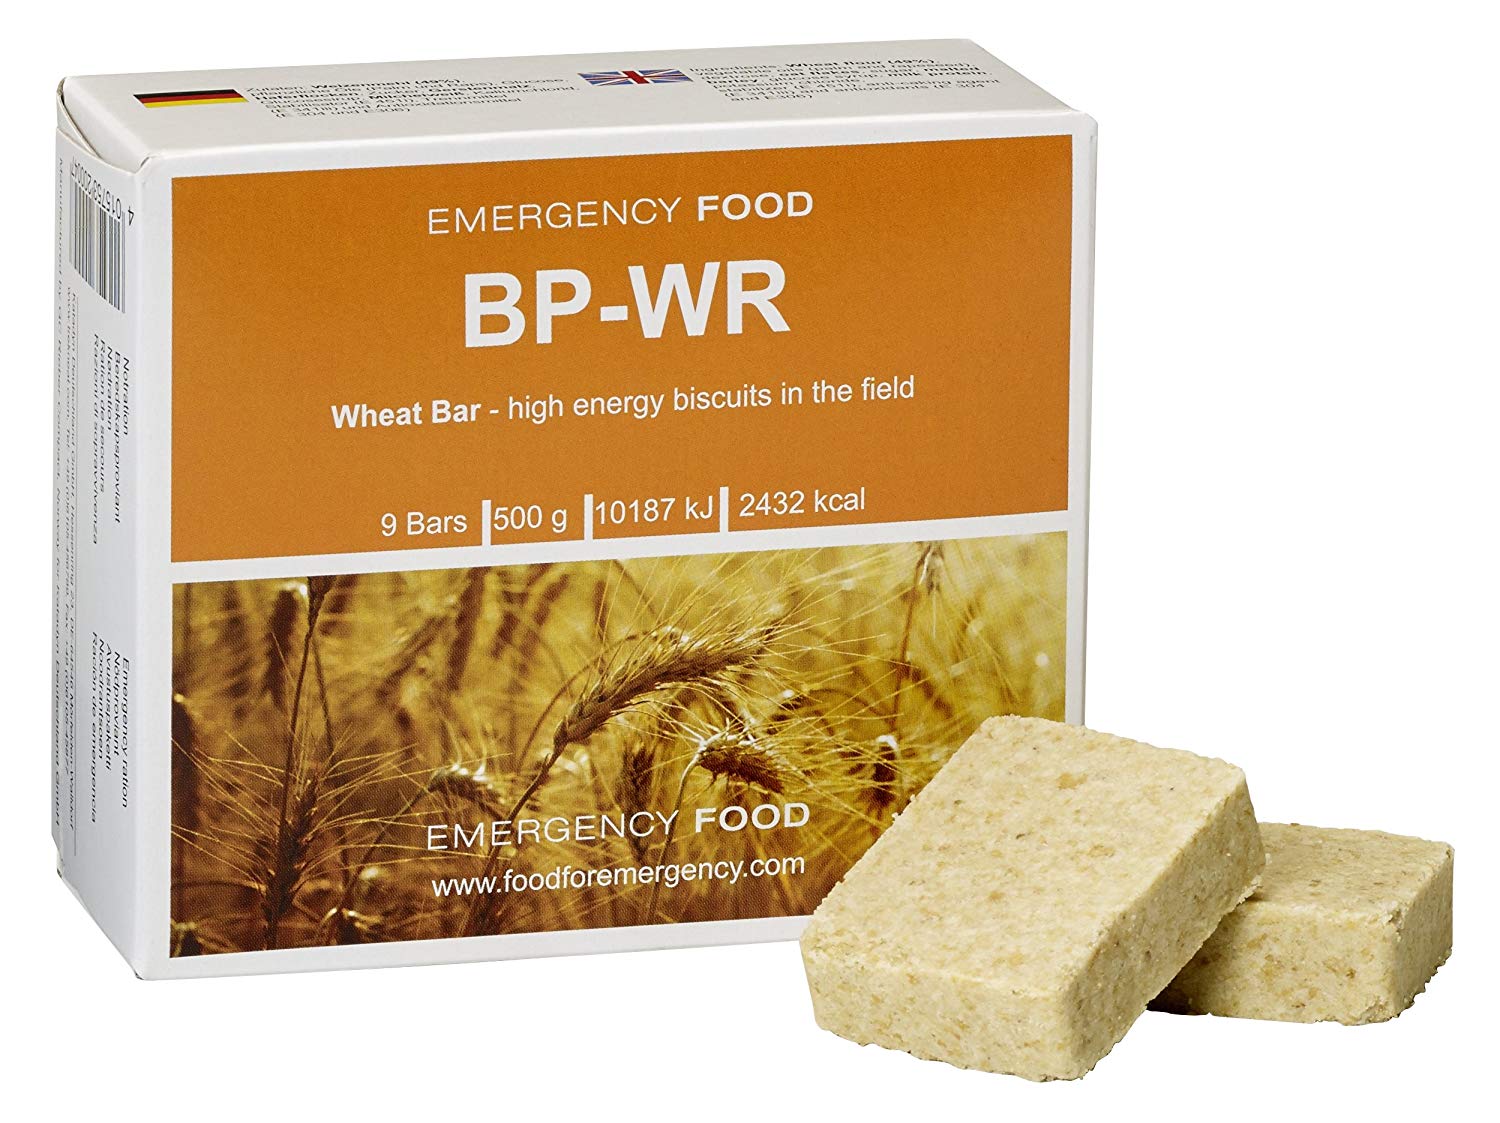 BP-WR Emergency Food 24 x 500g  Langzeitnahrung High Energy Biscuits